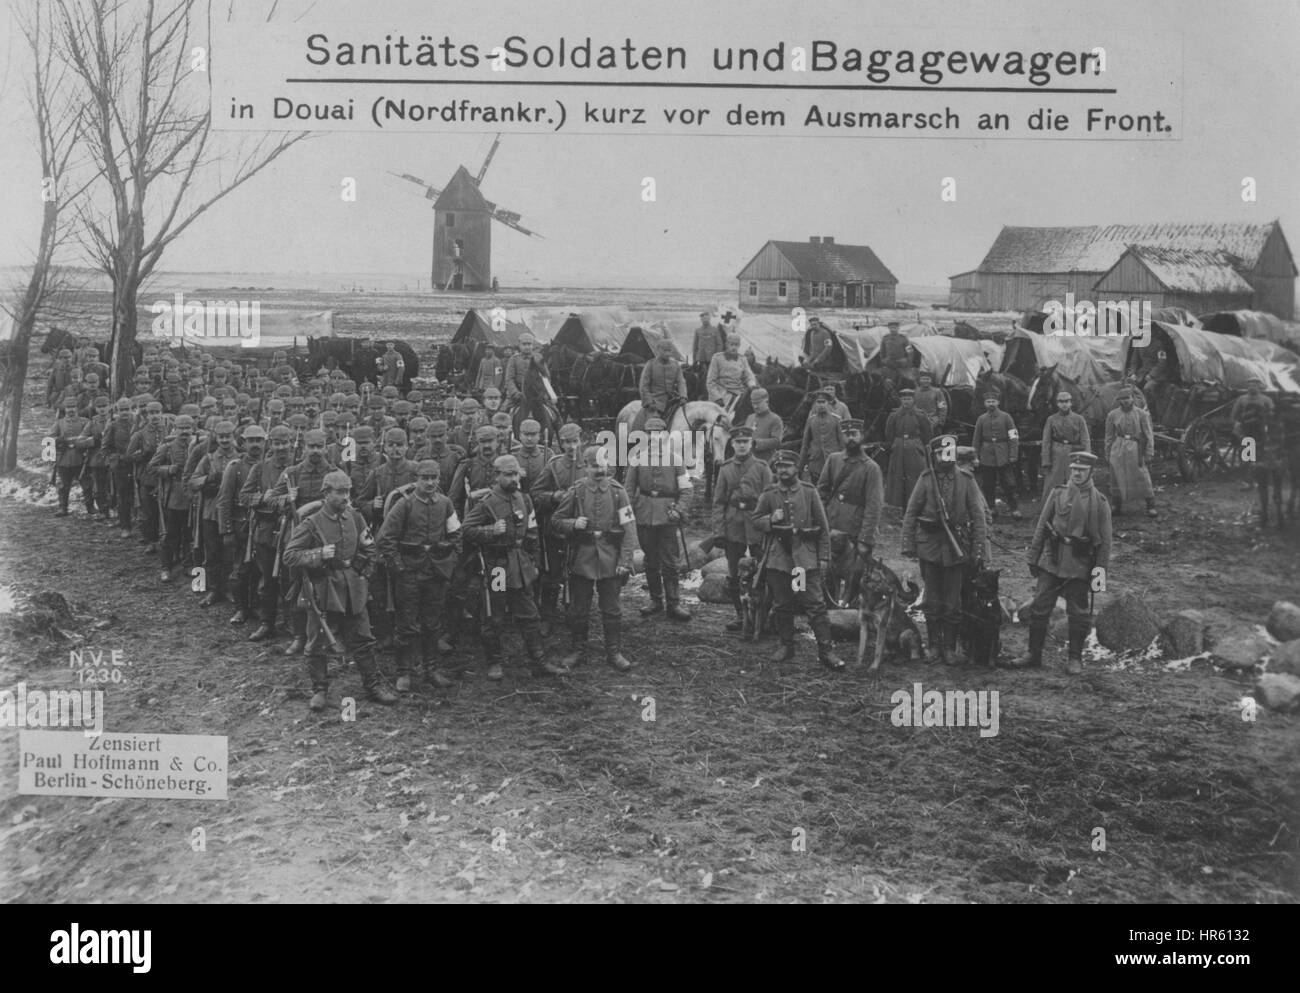 German medics and medical supplies beginning the march to the western front in northern France, World War I, 1915. From the New York Public Library. Stock Photo